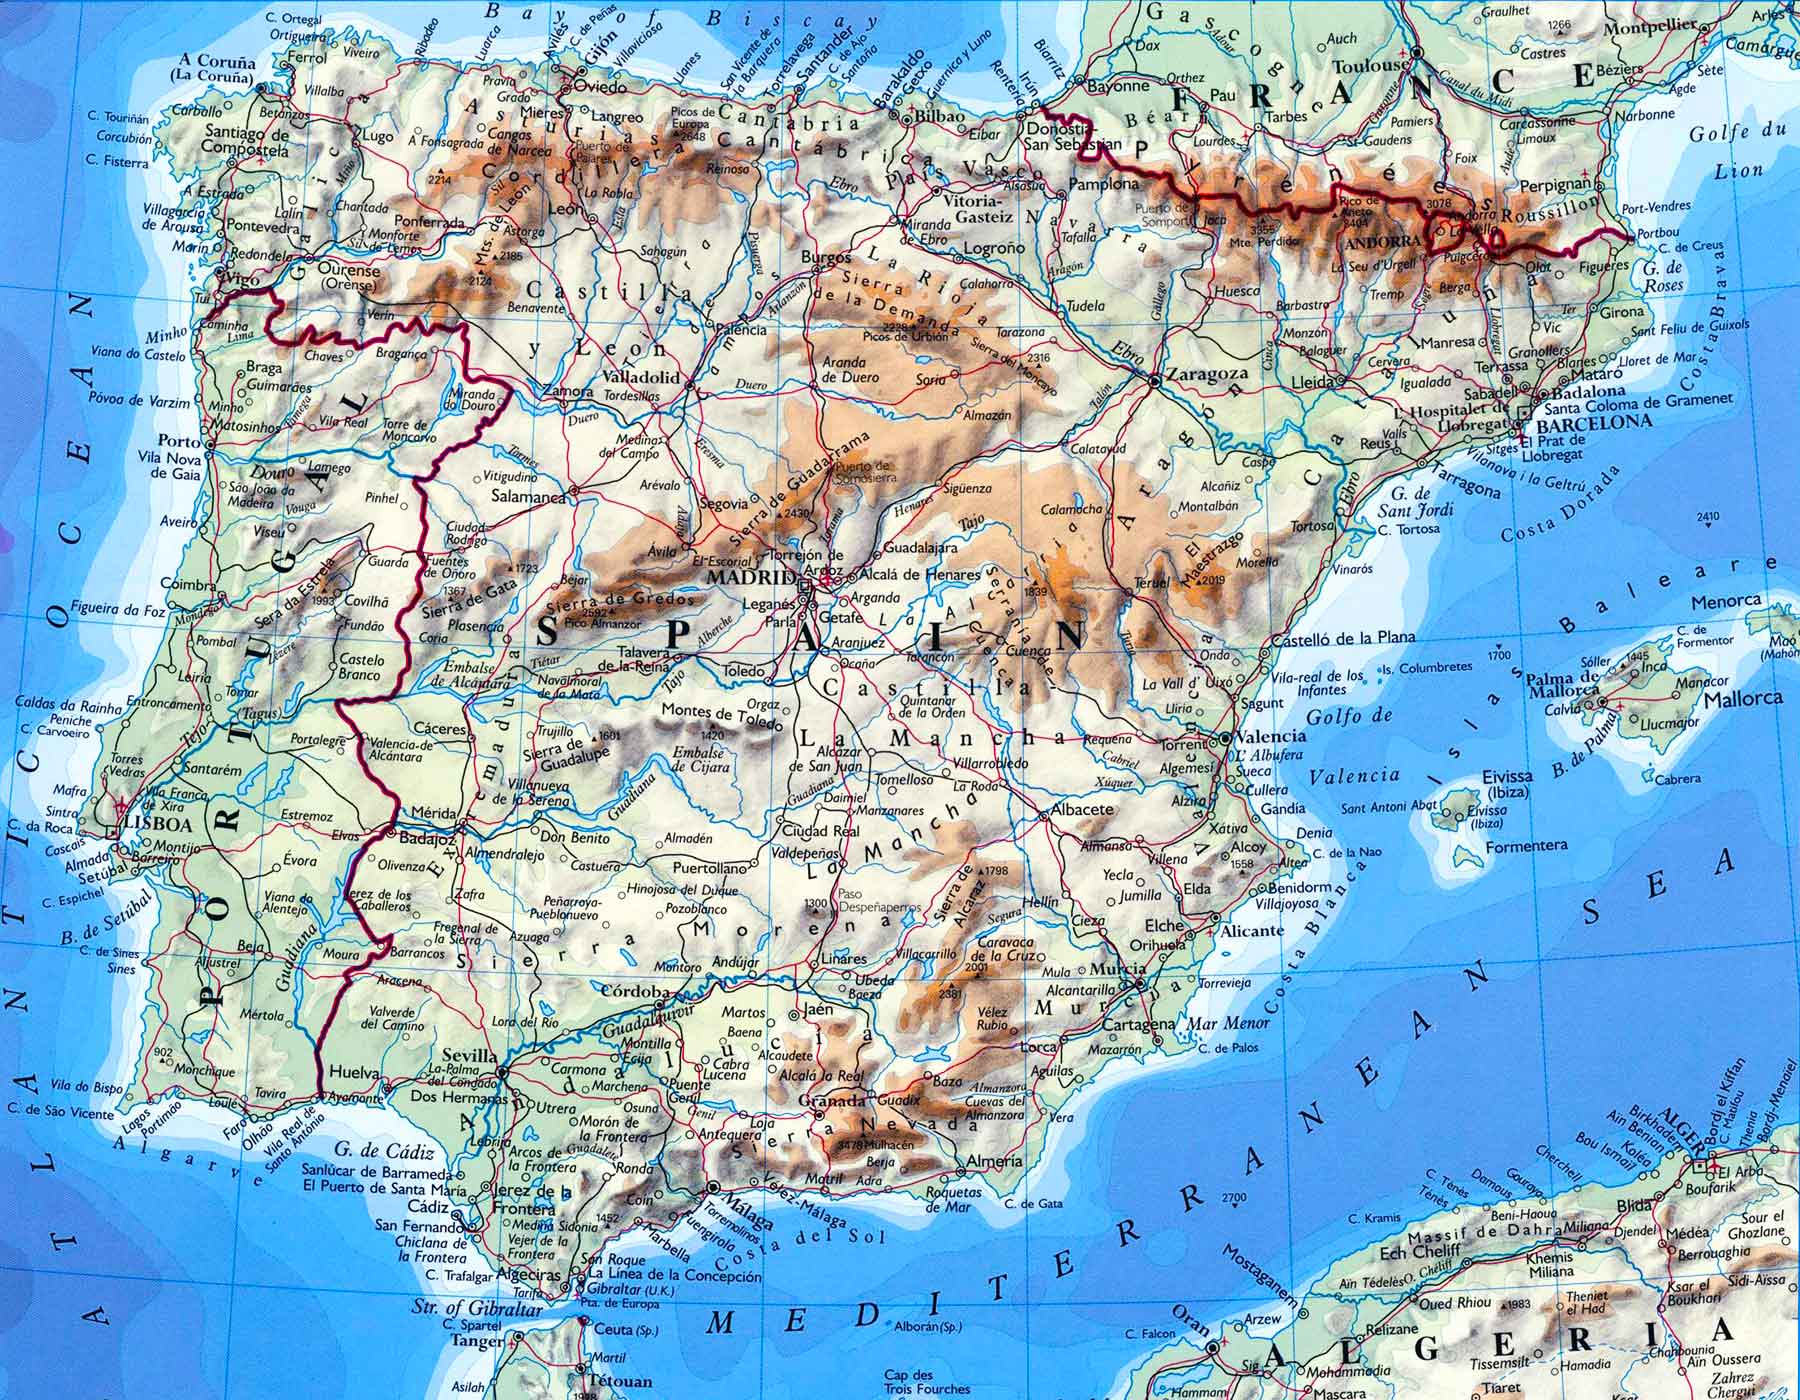 Map of Spain | Study Abroad Photo Journal - Steven Andrew Martin PhD - Education and Learning